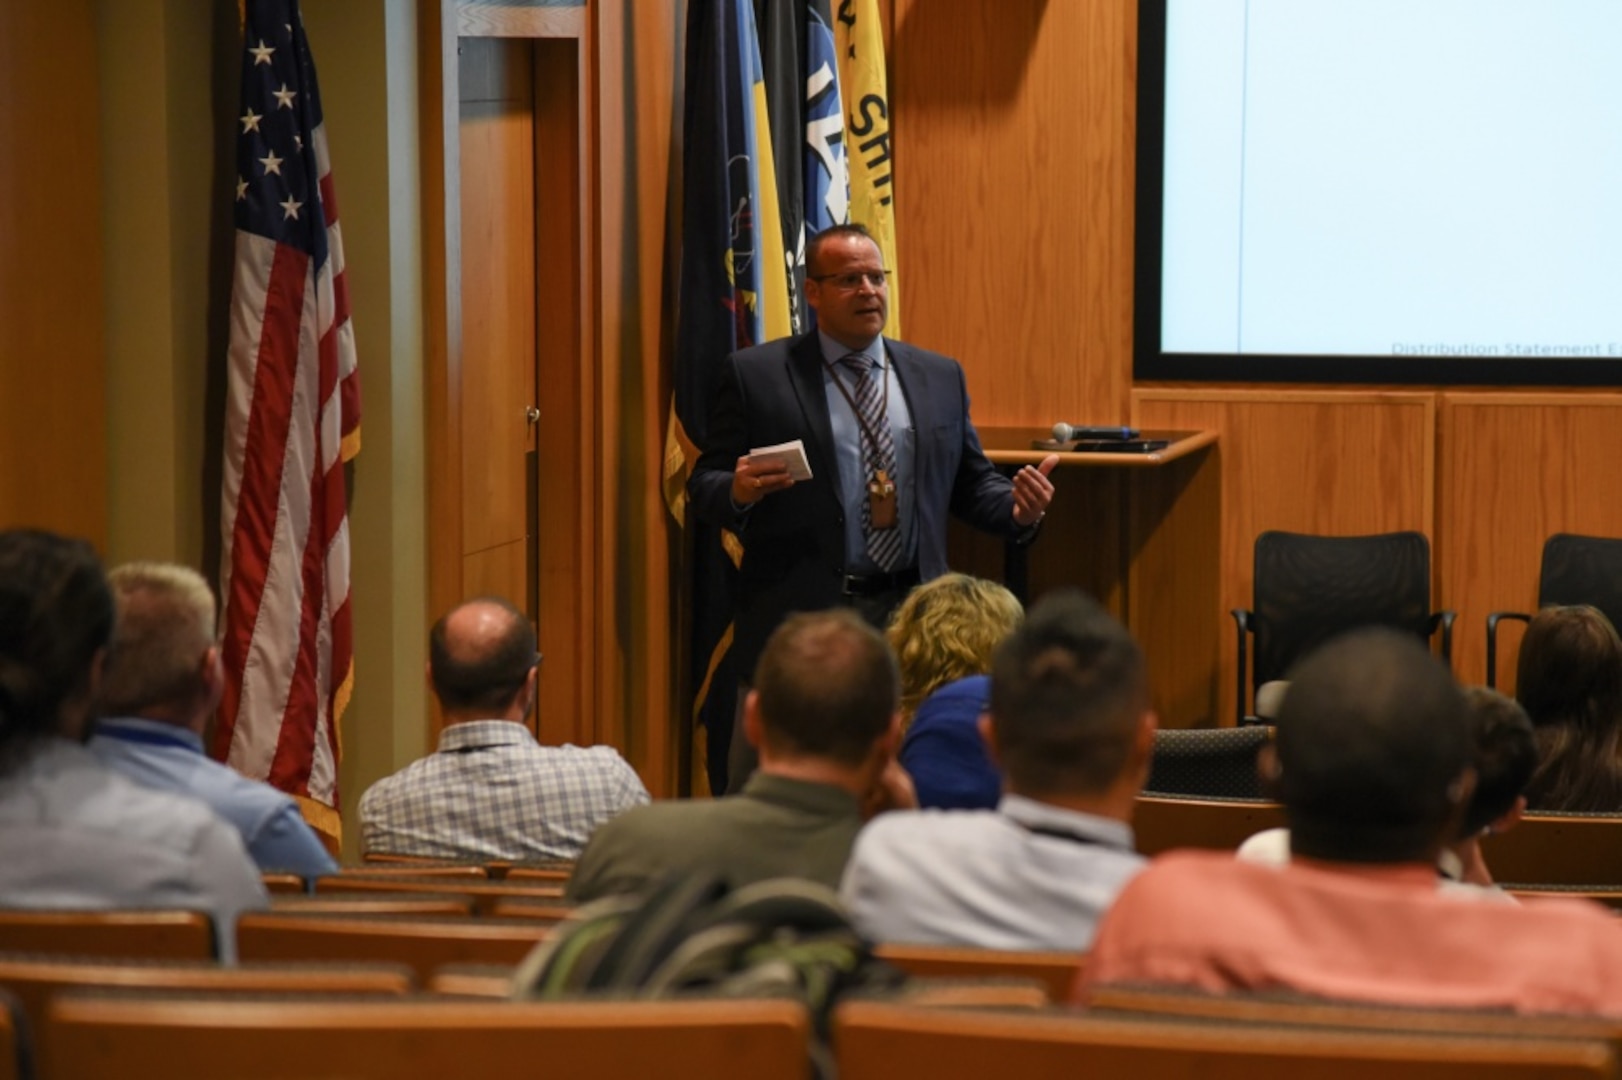 Naval Surface Warfare Center, Philadelphia Division (NSWCPD) Technical Director Tom Perotti addresses NSWCPD’s Branch Head Forum on Dec. 12, 2019. Perotti, along with NSWCPD Commanding Officer Capt. Dana Simon, provided their perspectives on the November 2019 Naval Sea Systems Command Leadership Forum, including encouraging attendees to continue to “expand the advantage” and to work with a “sense of urgency.” (U.S. Navy photo by Mass Communications Specialist 1st Class John Banfield/released)